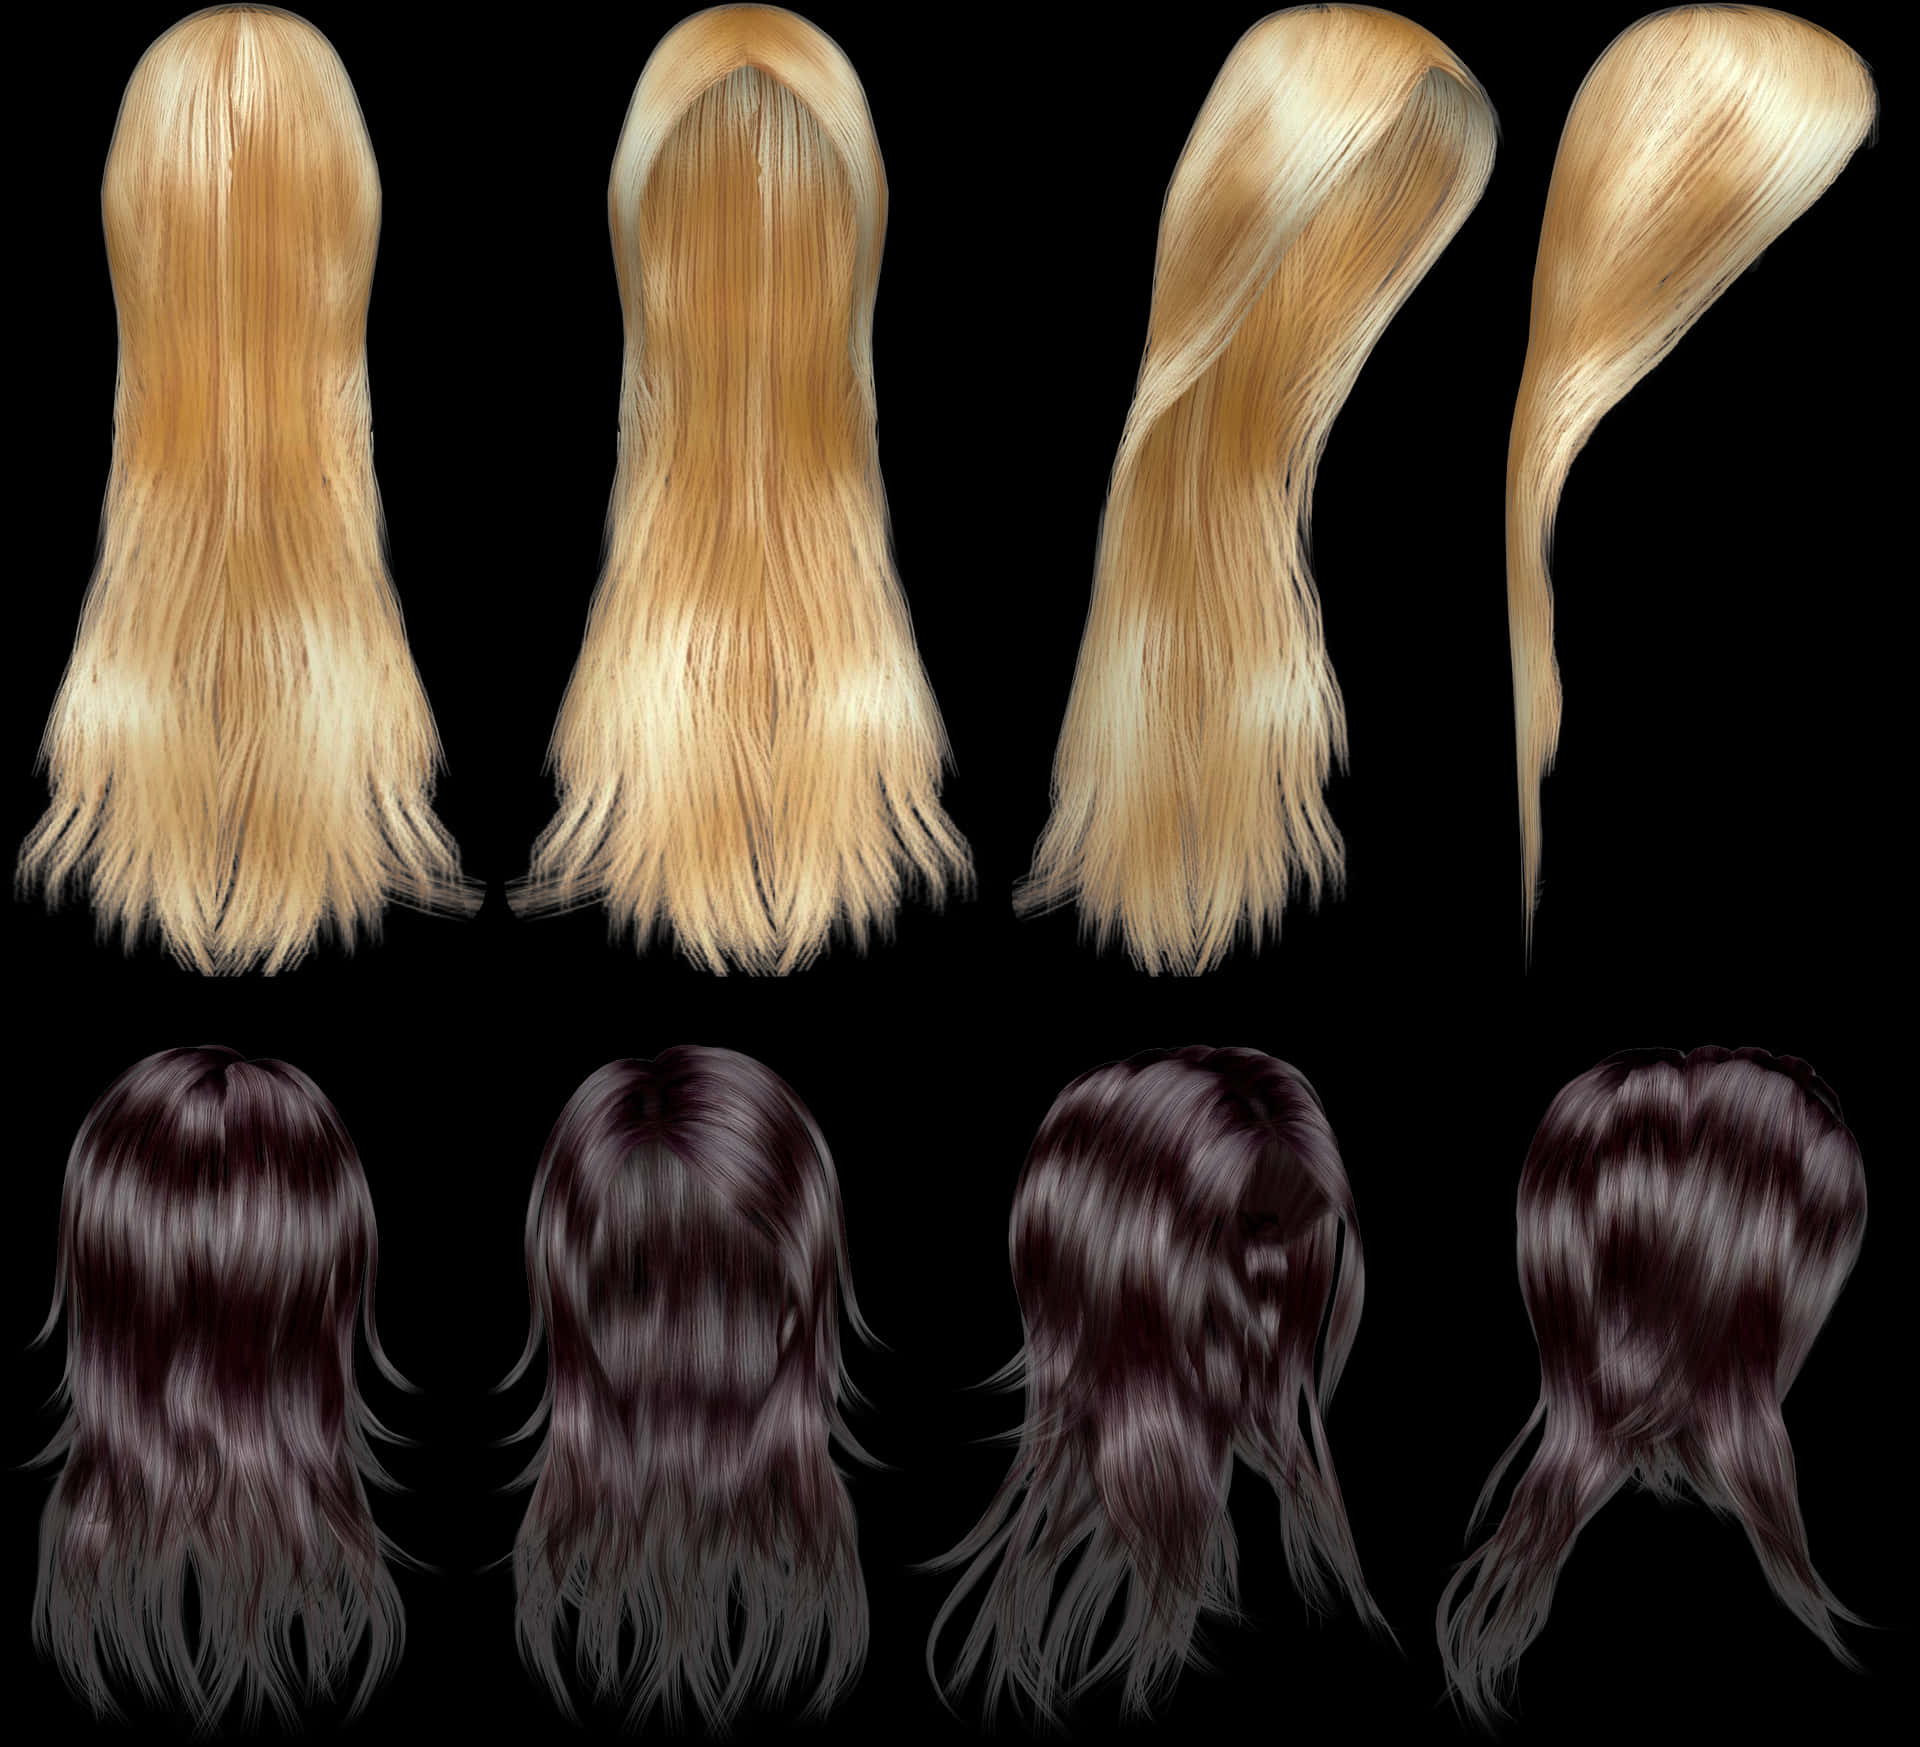 Varietyof Wigs Stylesand Colors PNG image